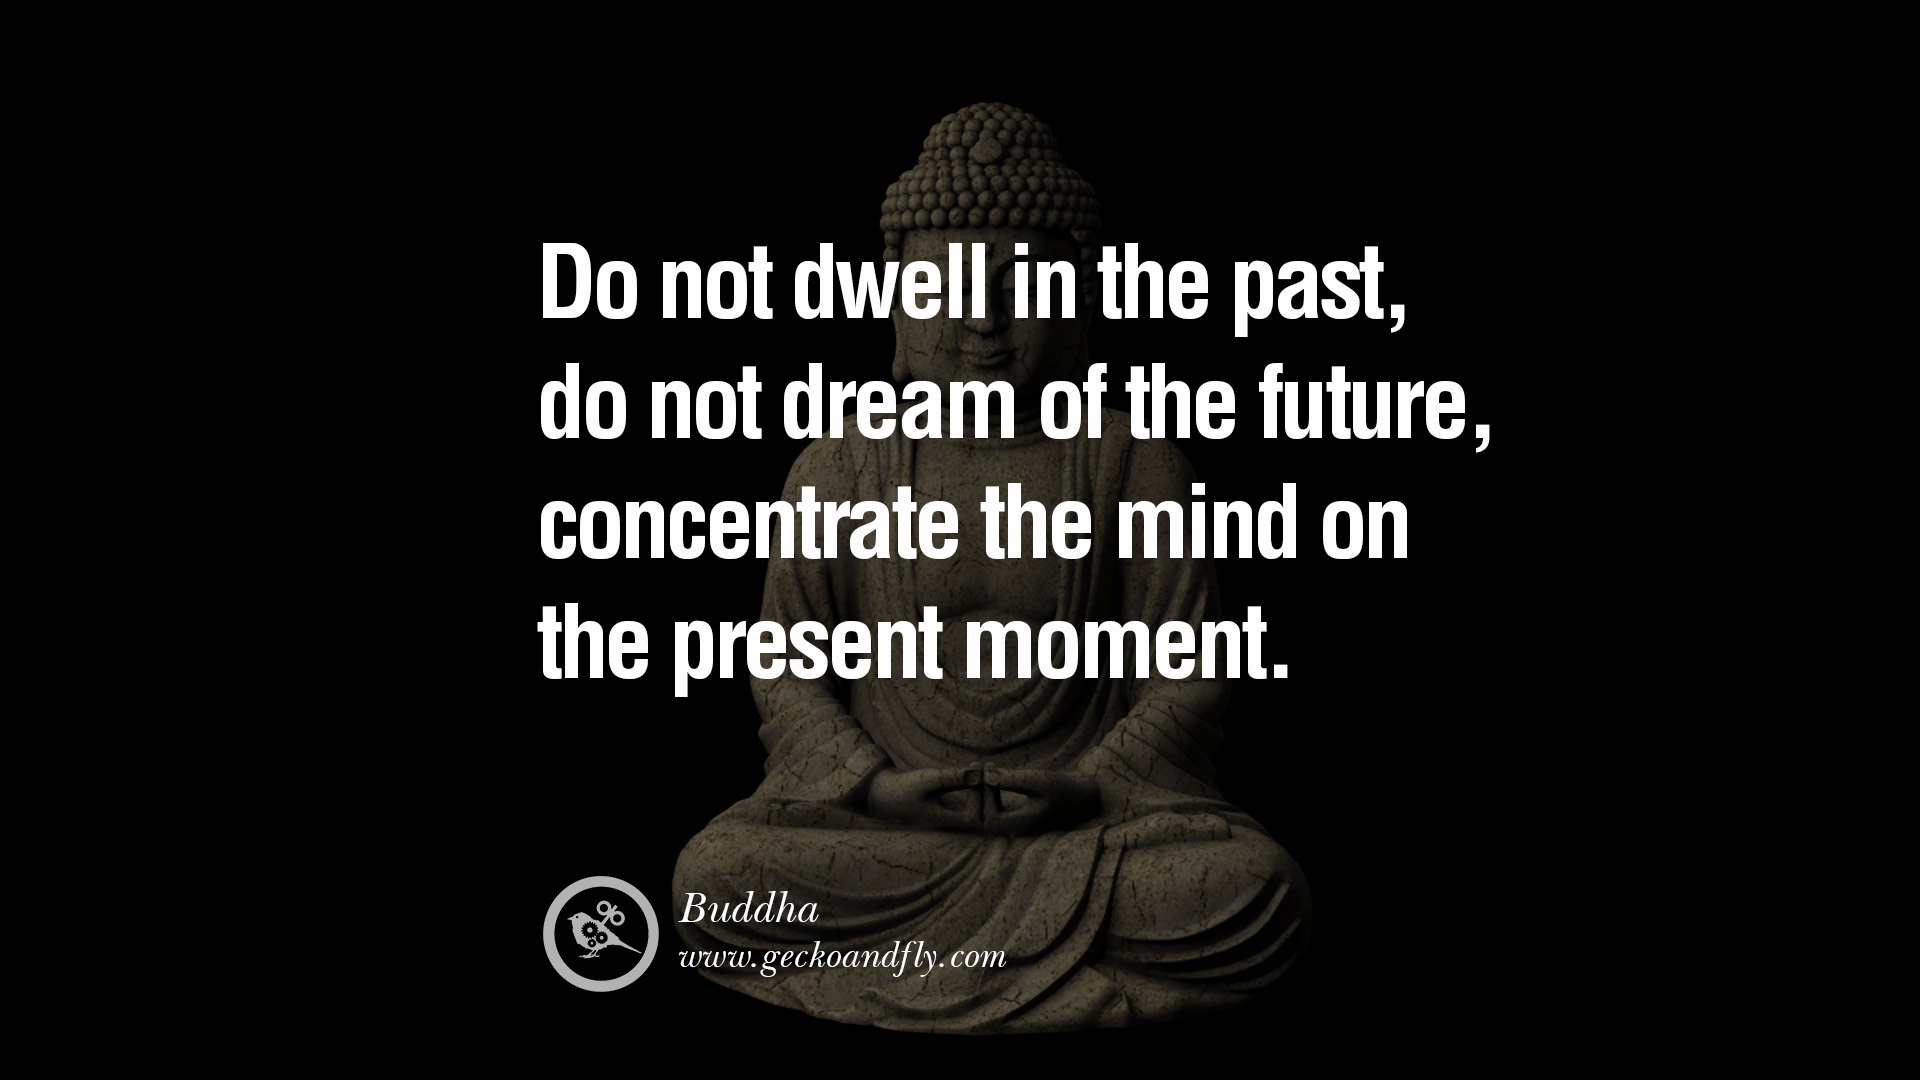 Buddha Quotes About Living In The Moment. QuotesGram